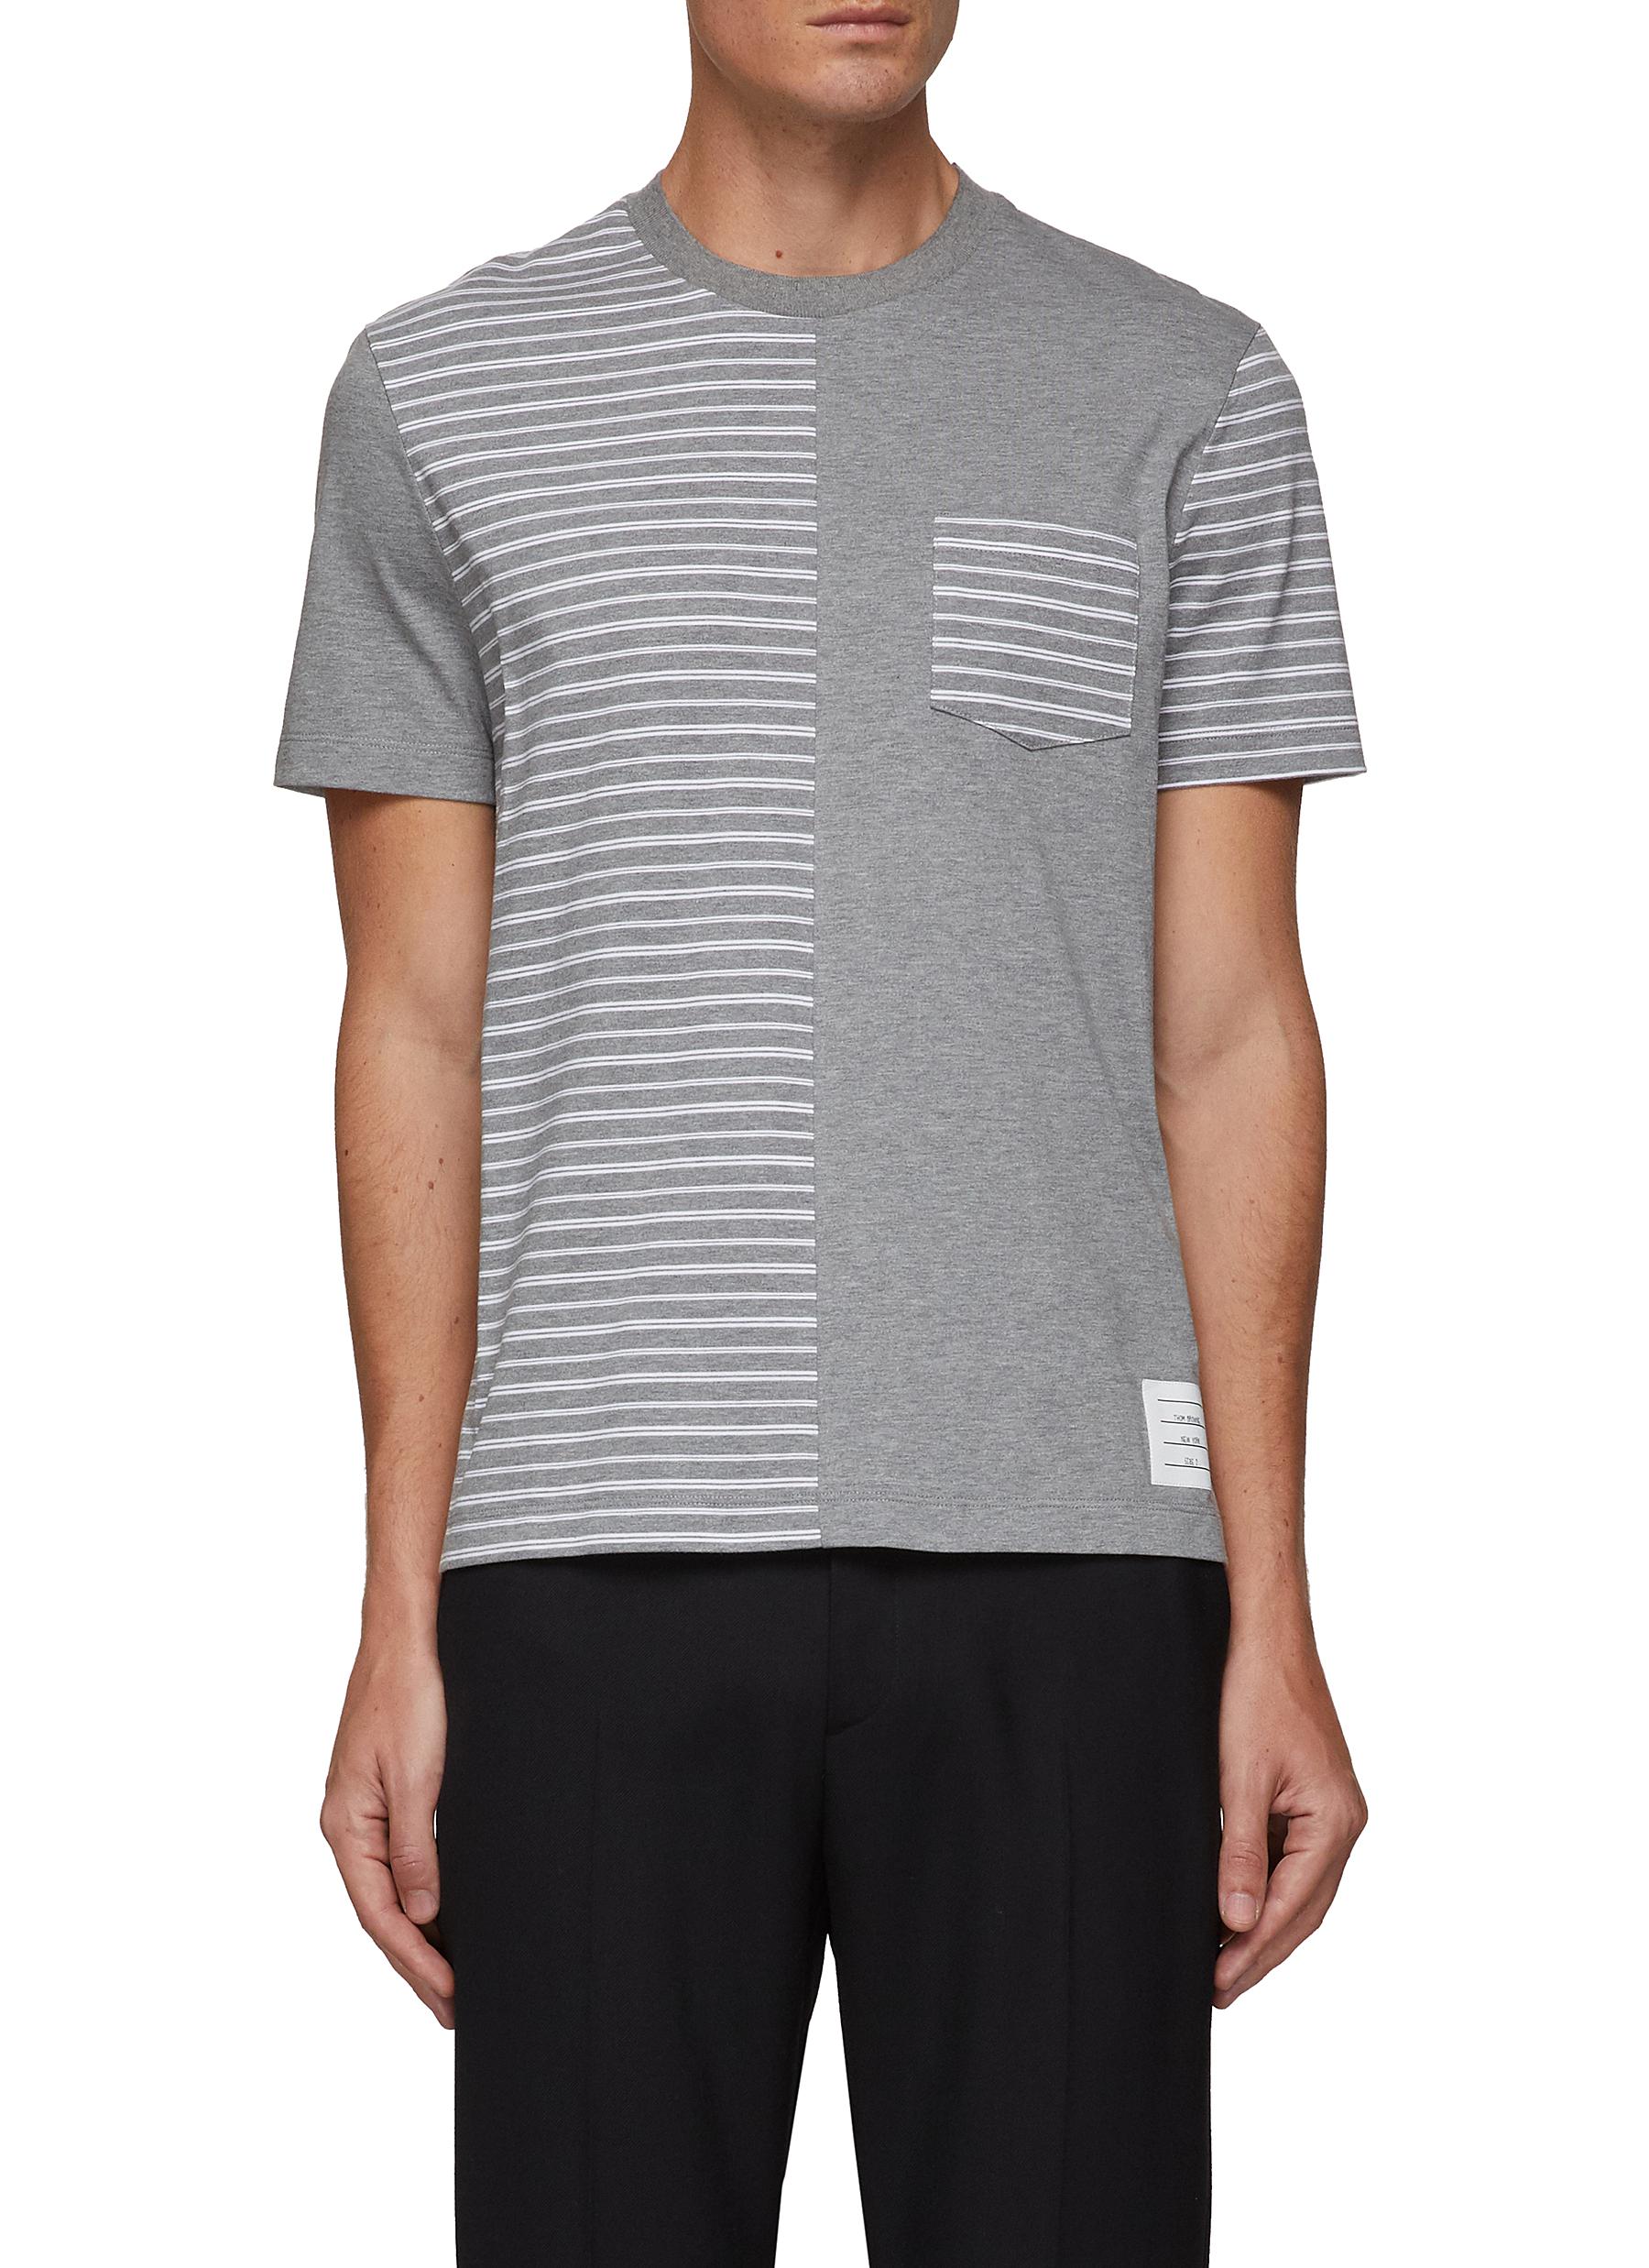 THOM BROWNE SHORT SLEEVE RELAXED FIT STRIPE COTTON JERSEY T-SHIRT